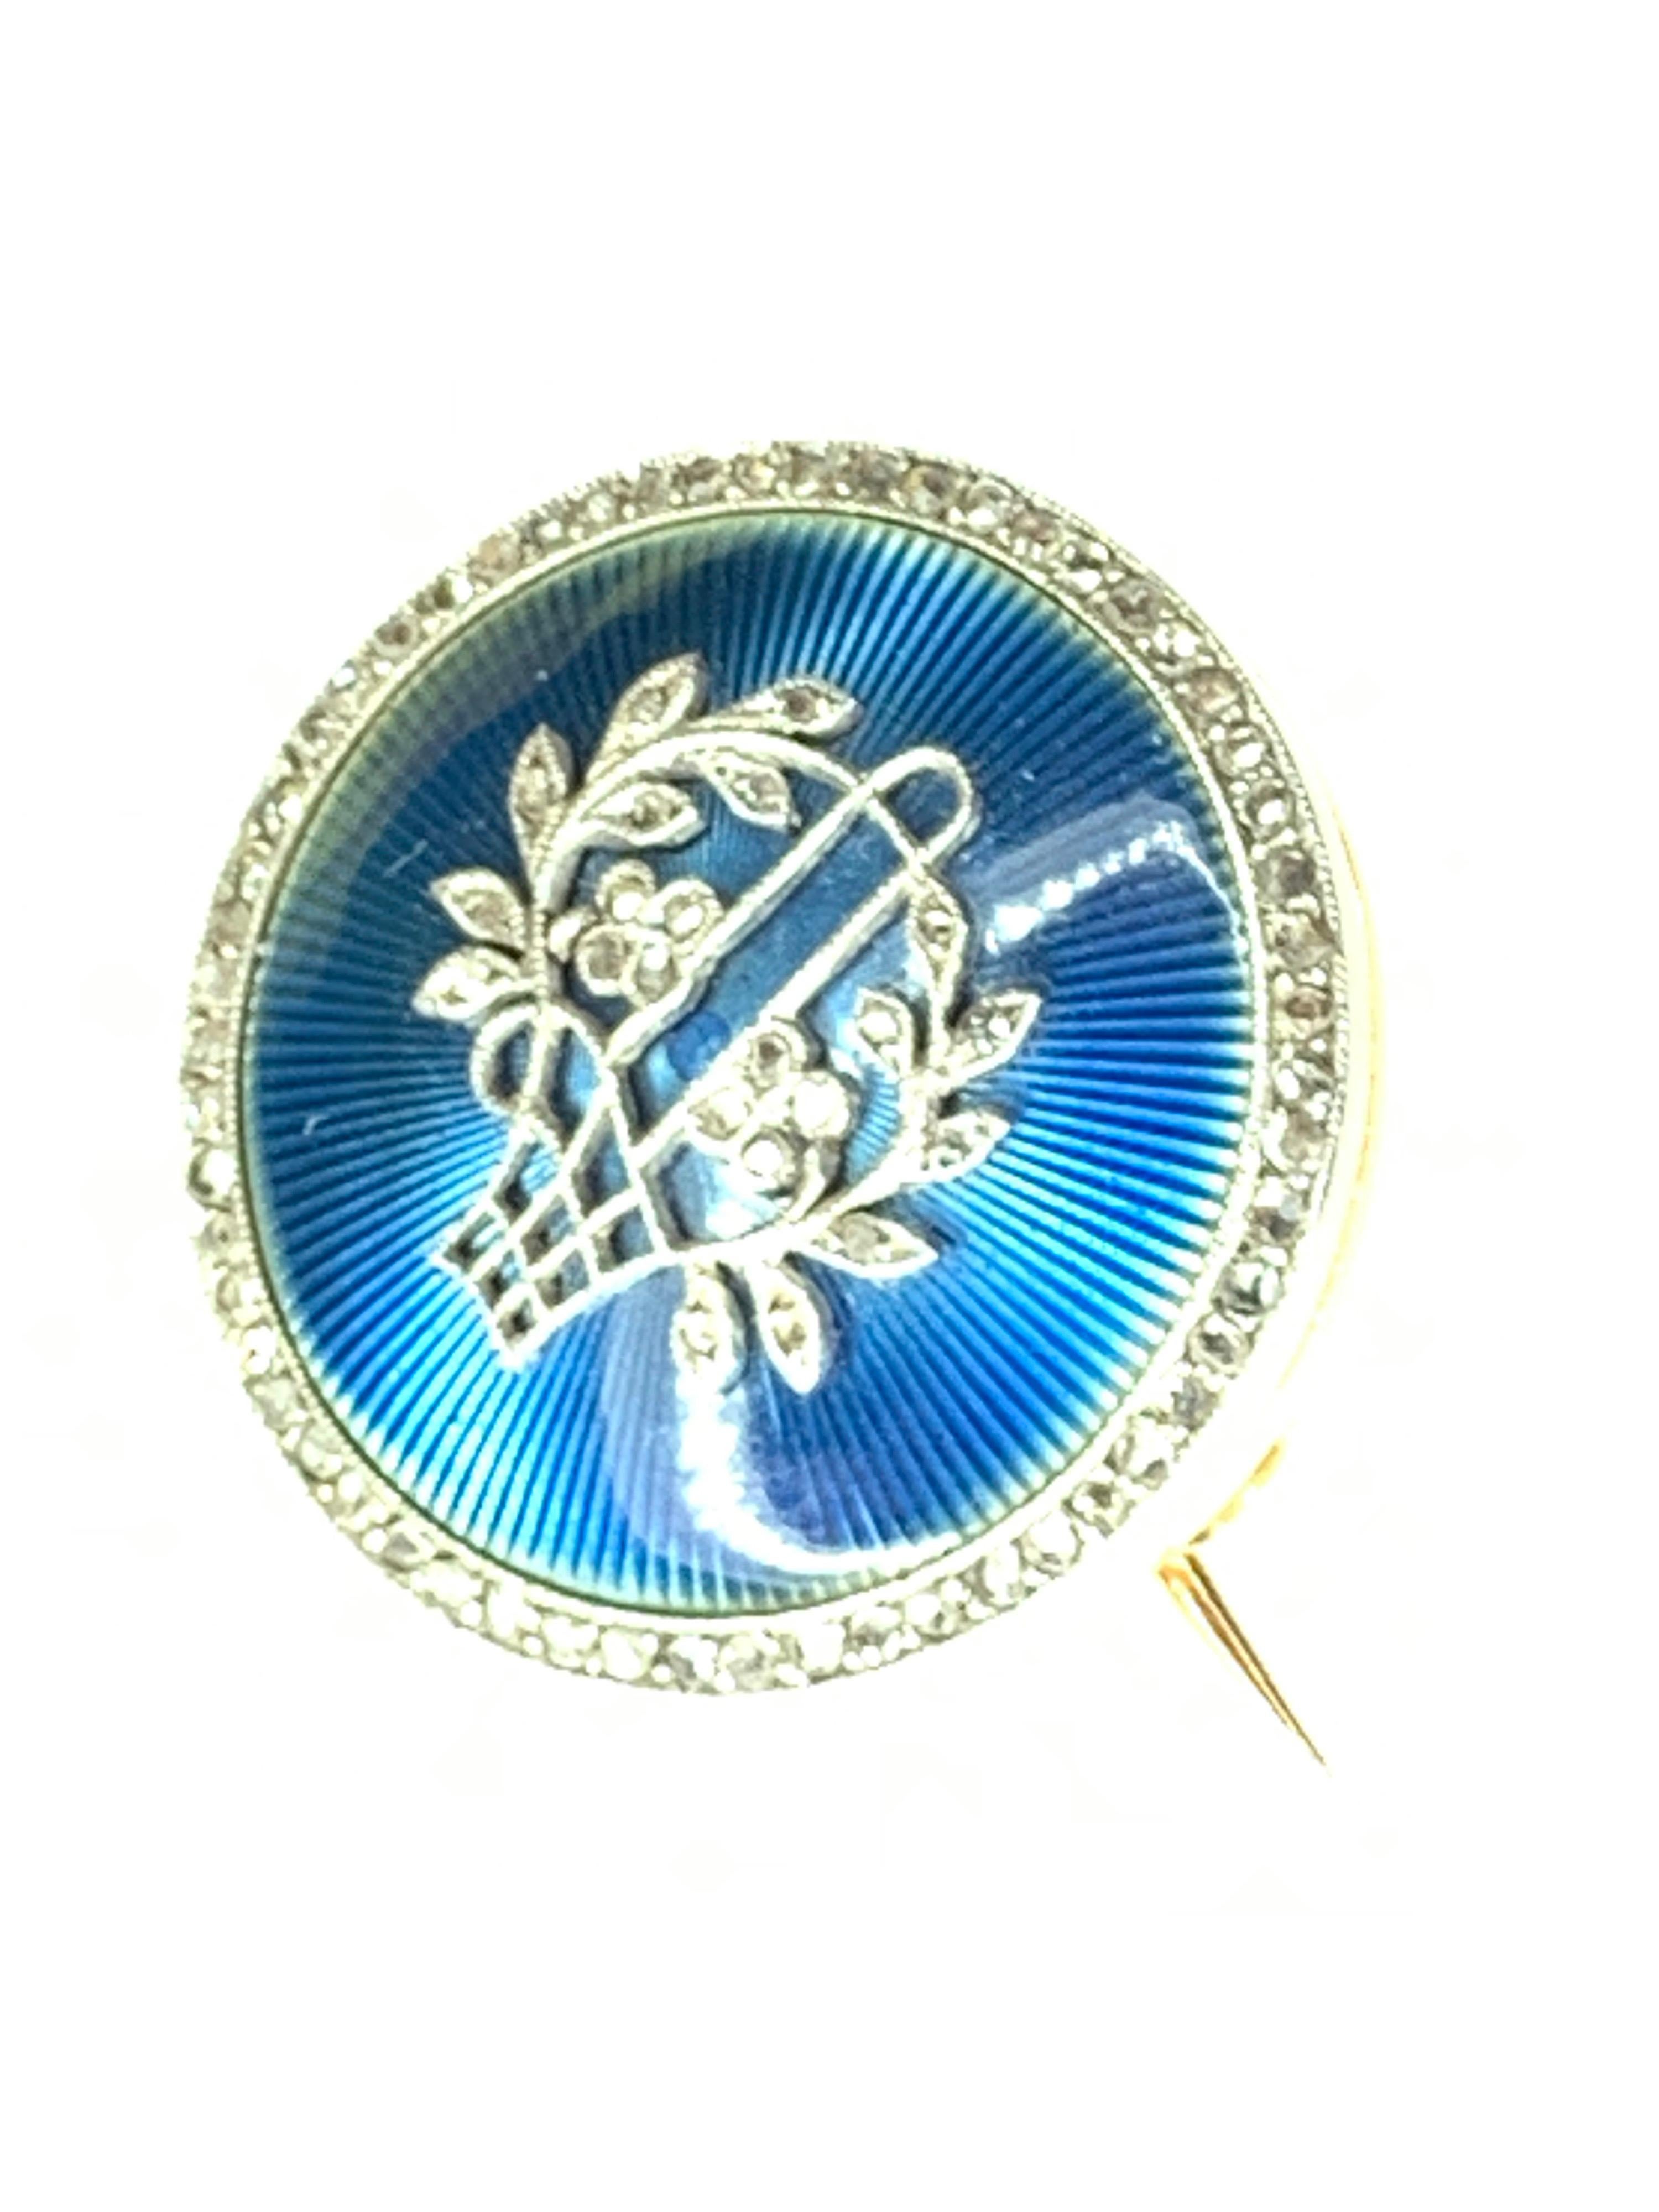 Gemolithos, Belle ´Epoque rosé-cut diamond and enamel brooch-locket, circa 1900s,
measurements: 24x24mm, weight: 9.3gr. The color of the enamel is more like as of the picture number four, brooch with the ruler. 